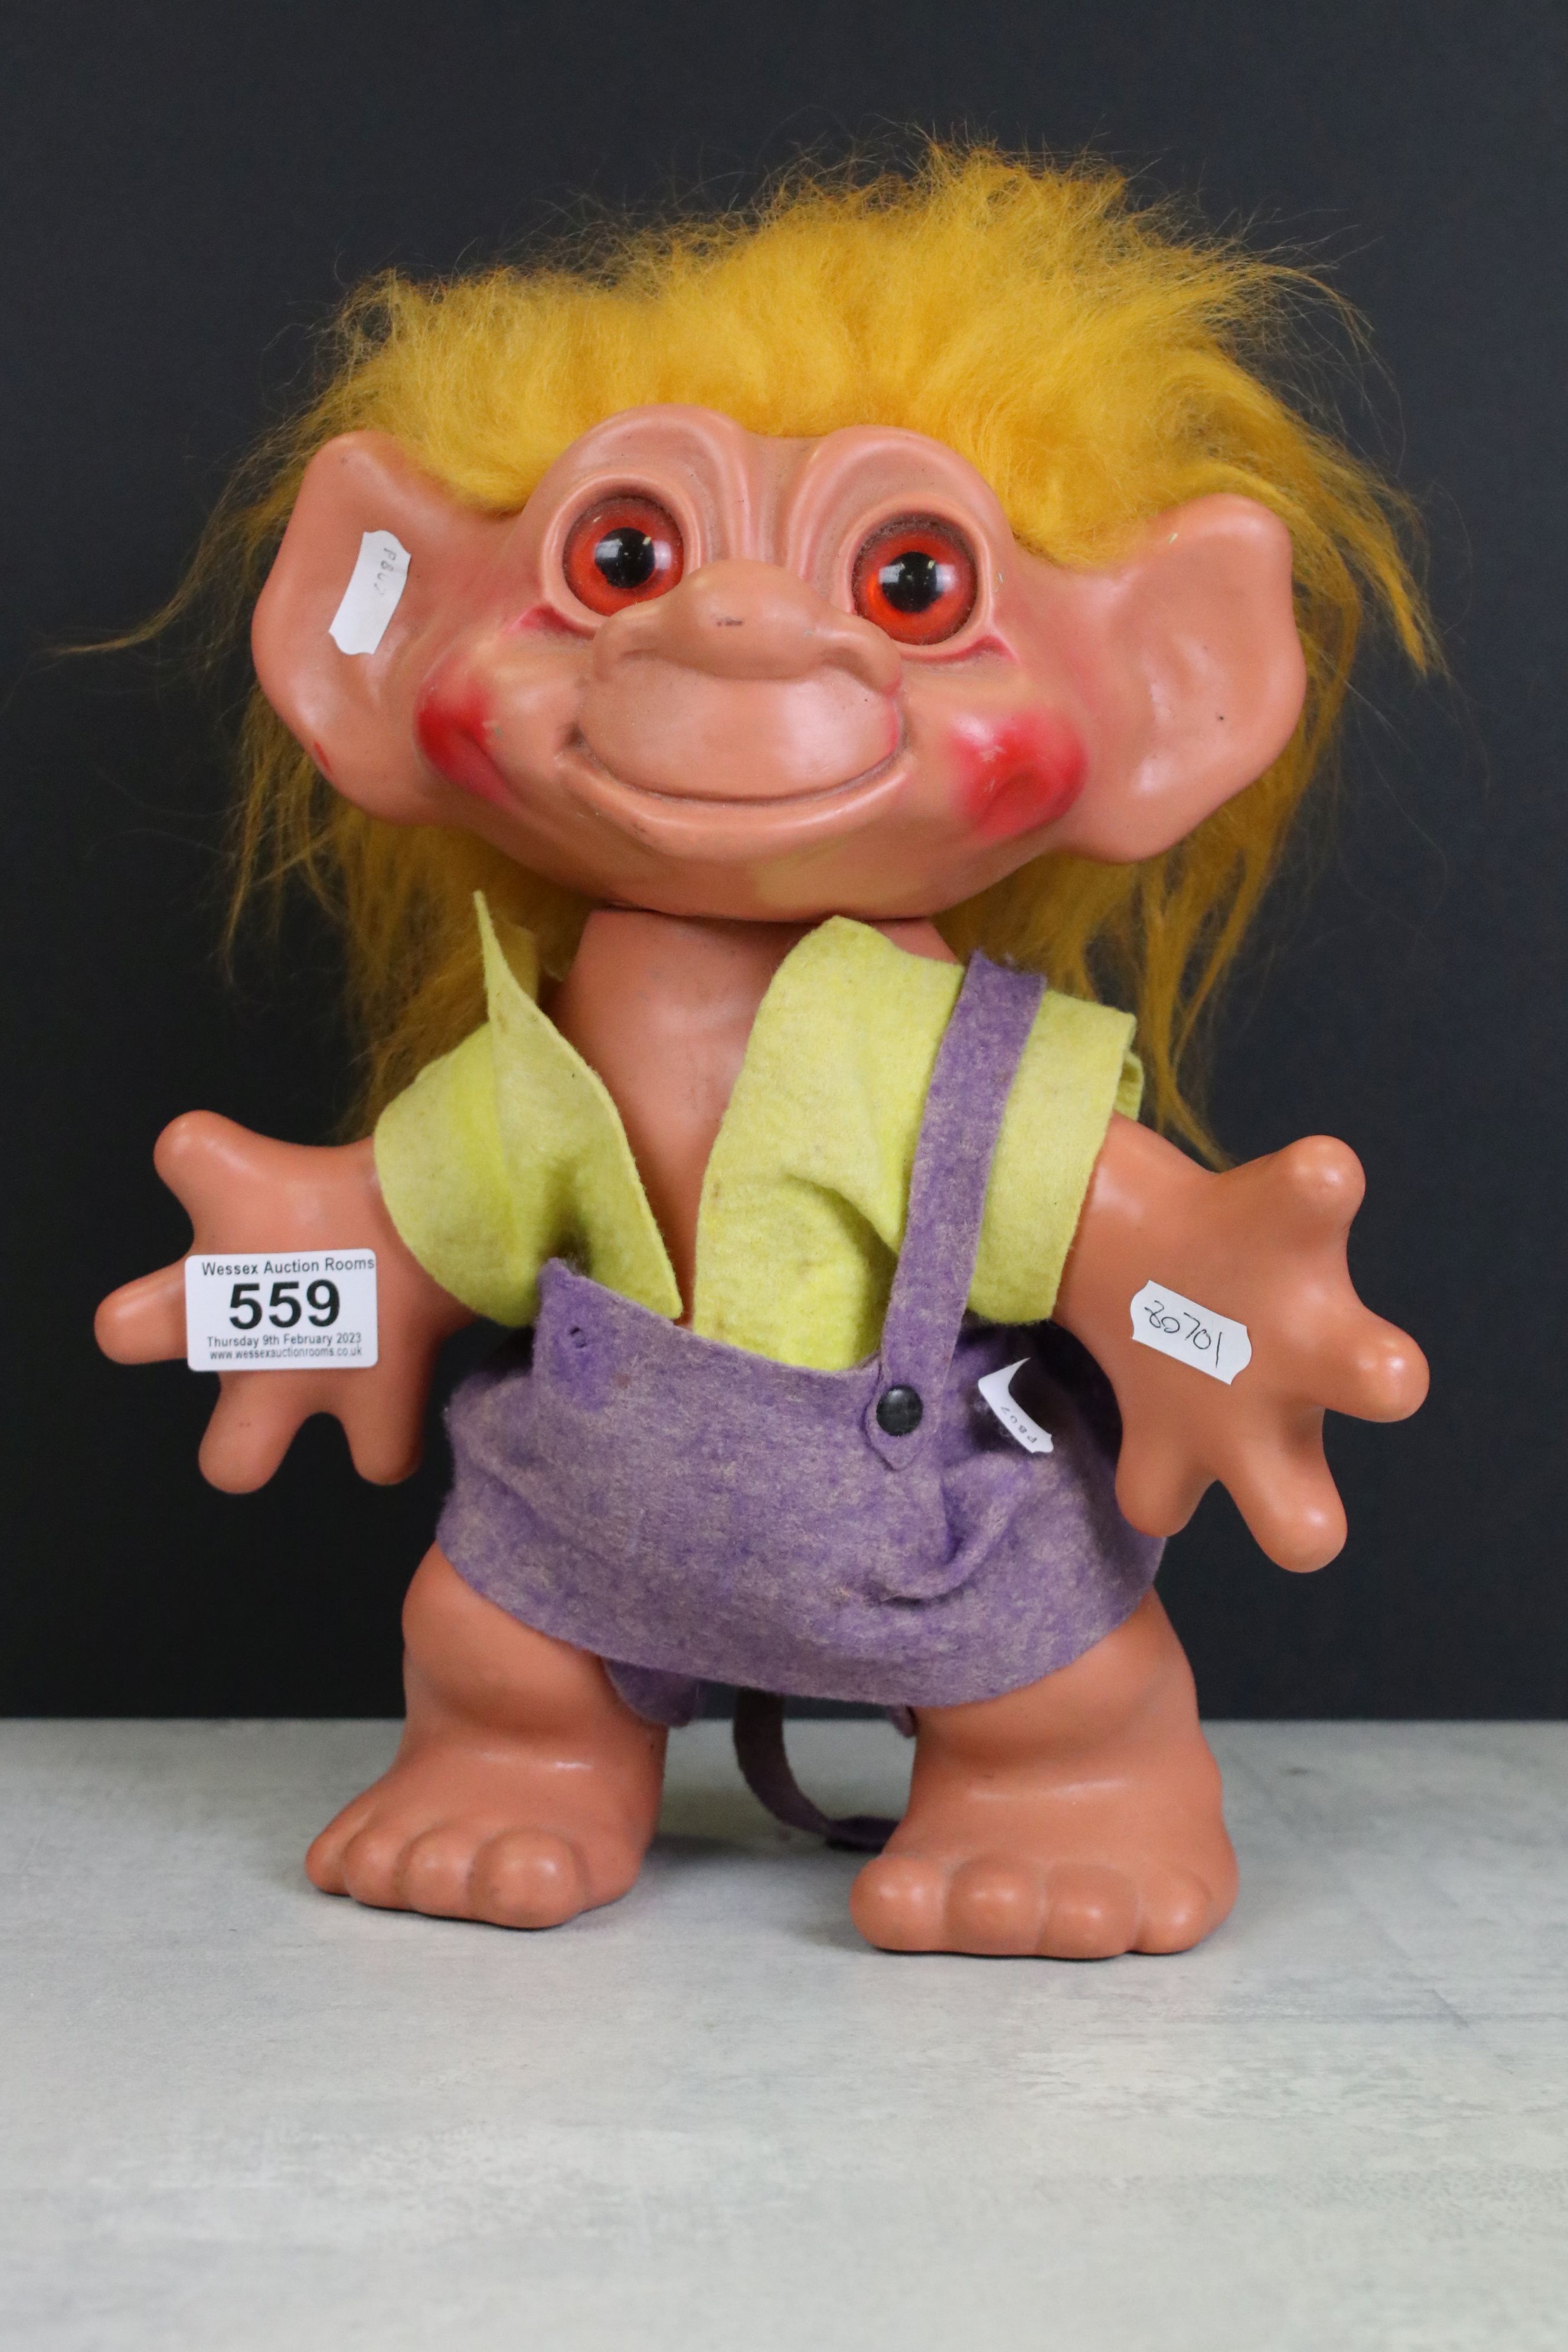 Original Troll figure marked DAM Things Establishment 1964, 30cm in height, touch grubbby but gd